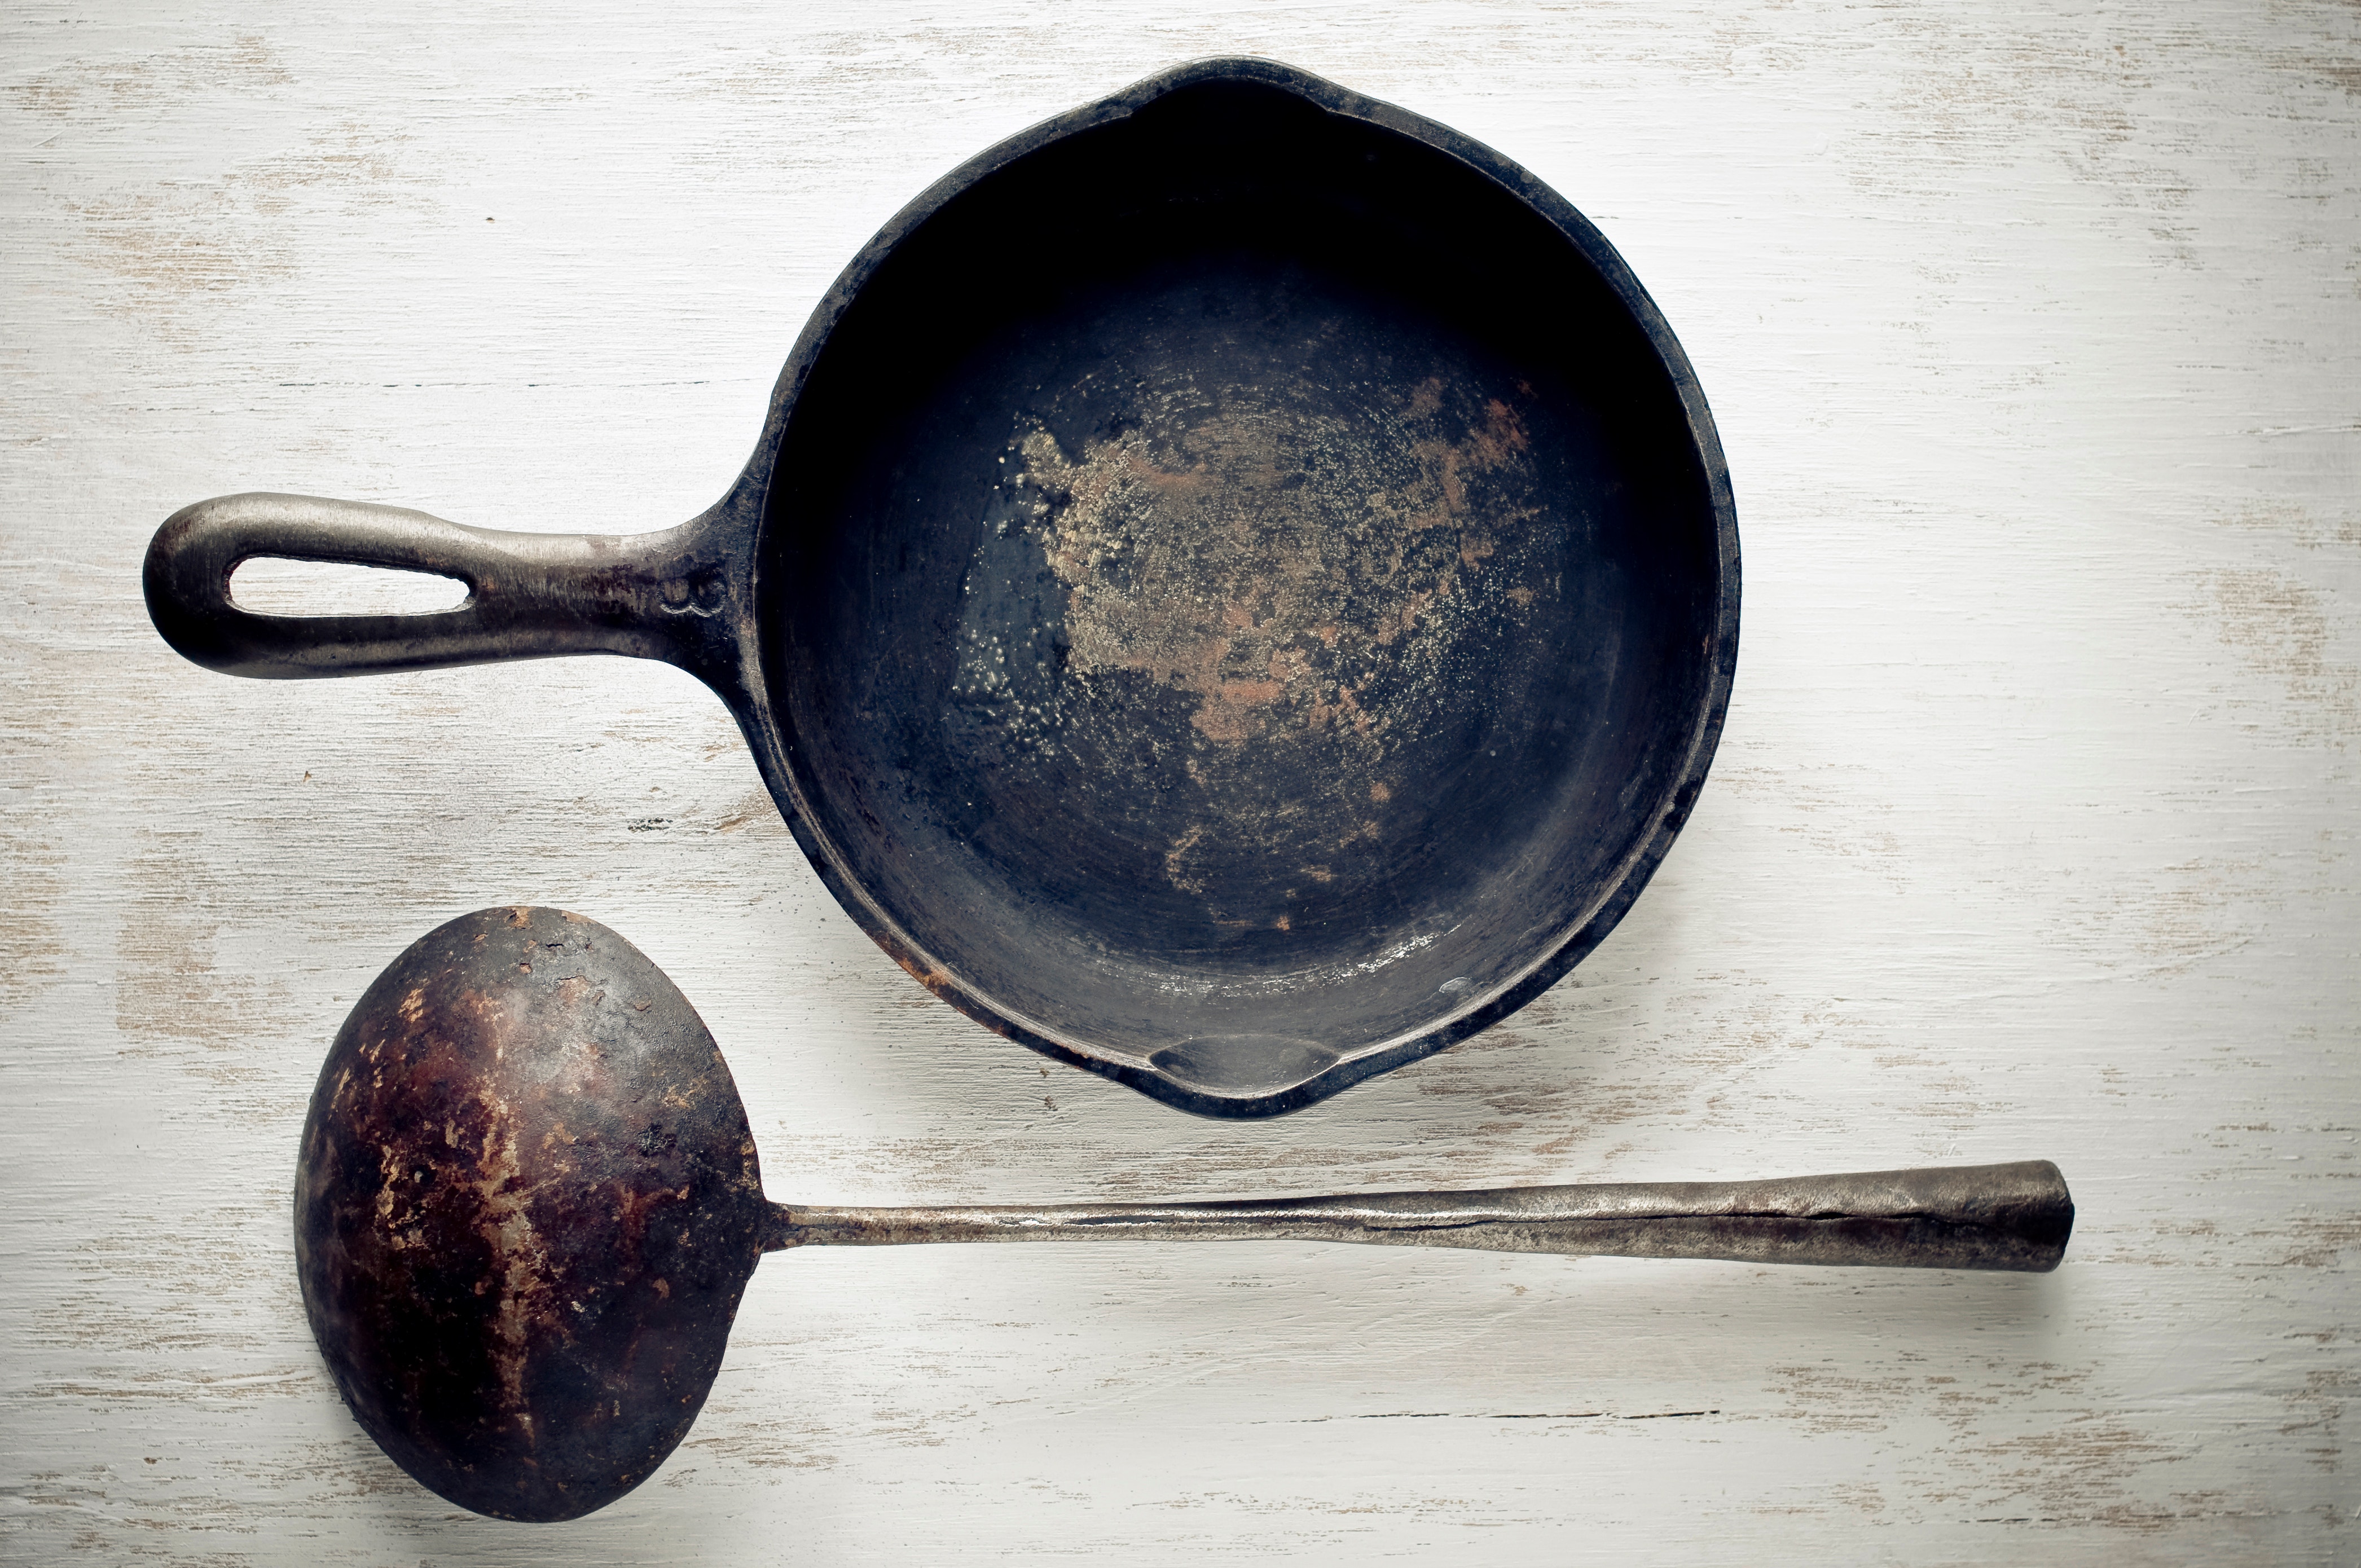 Is Using Rusty Cookware Really That Big Of A Deal?